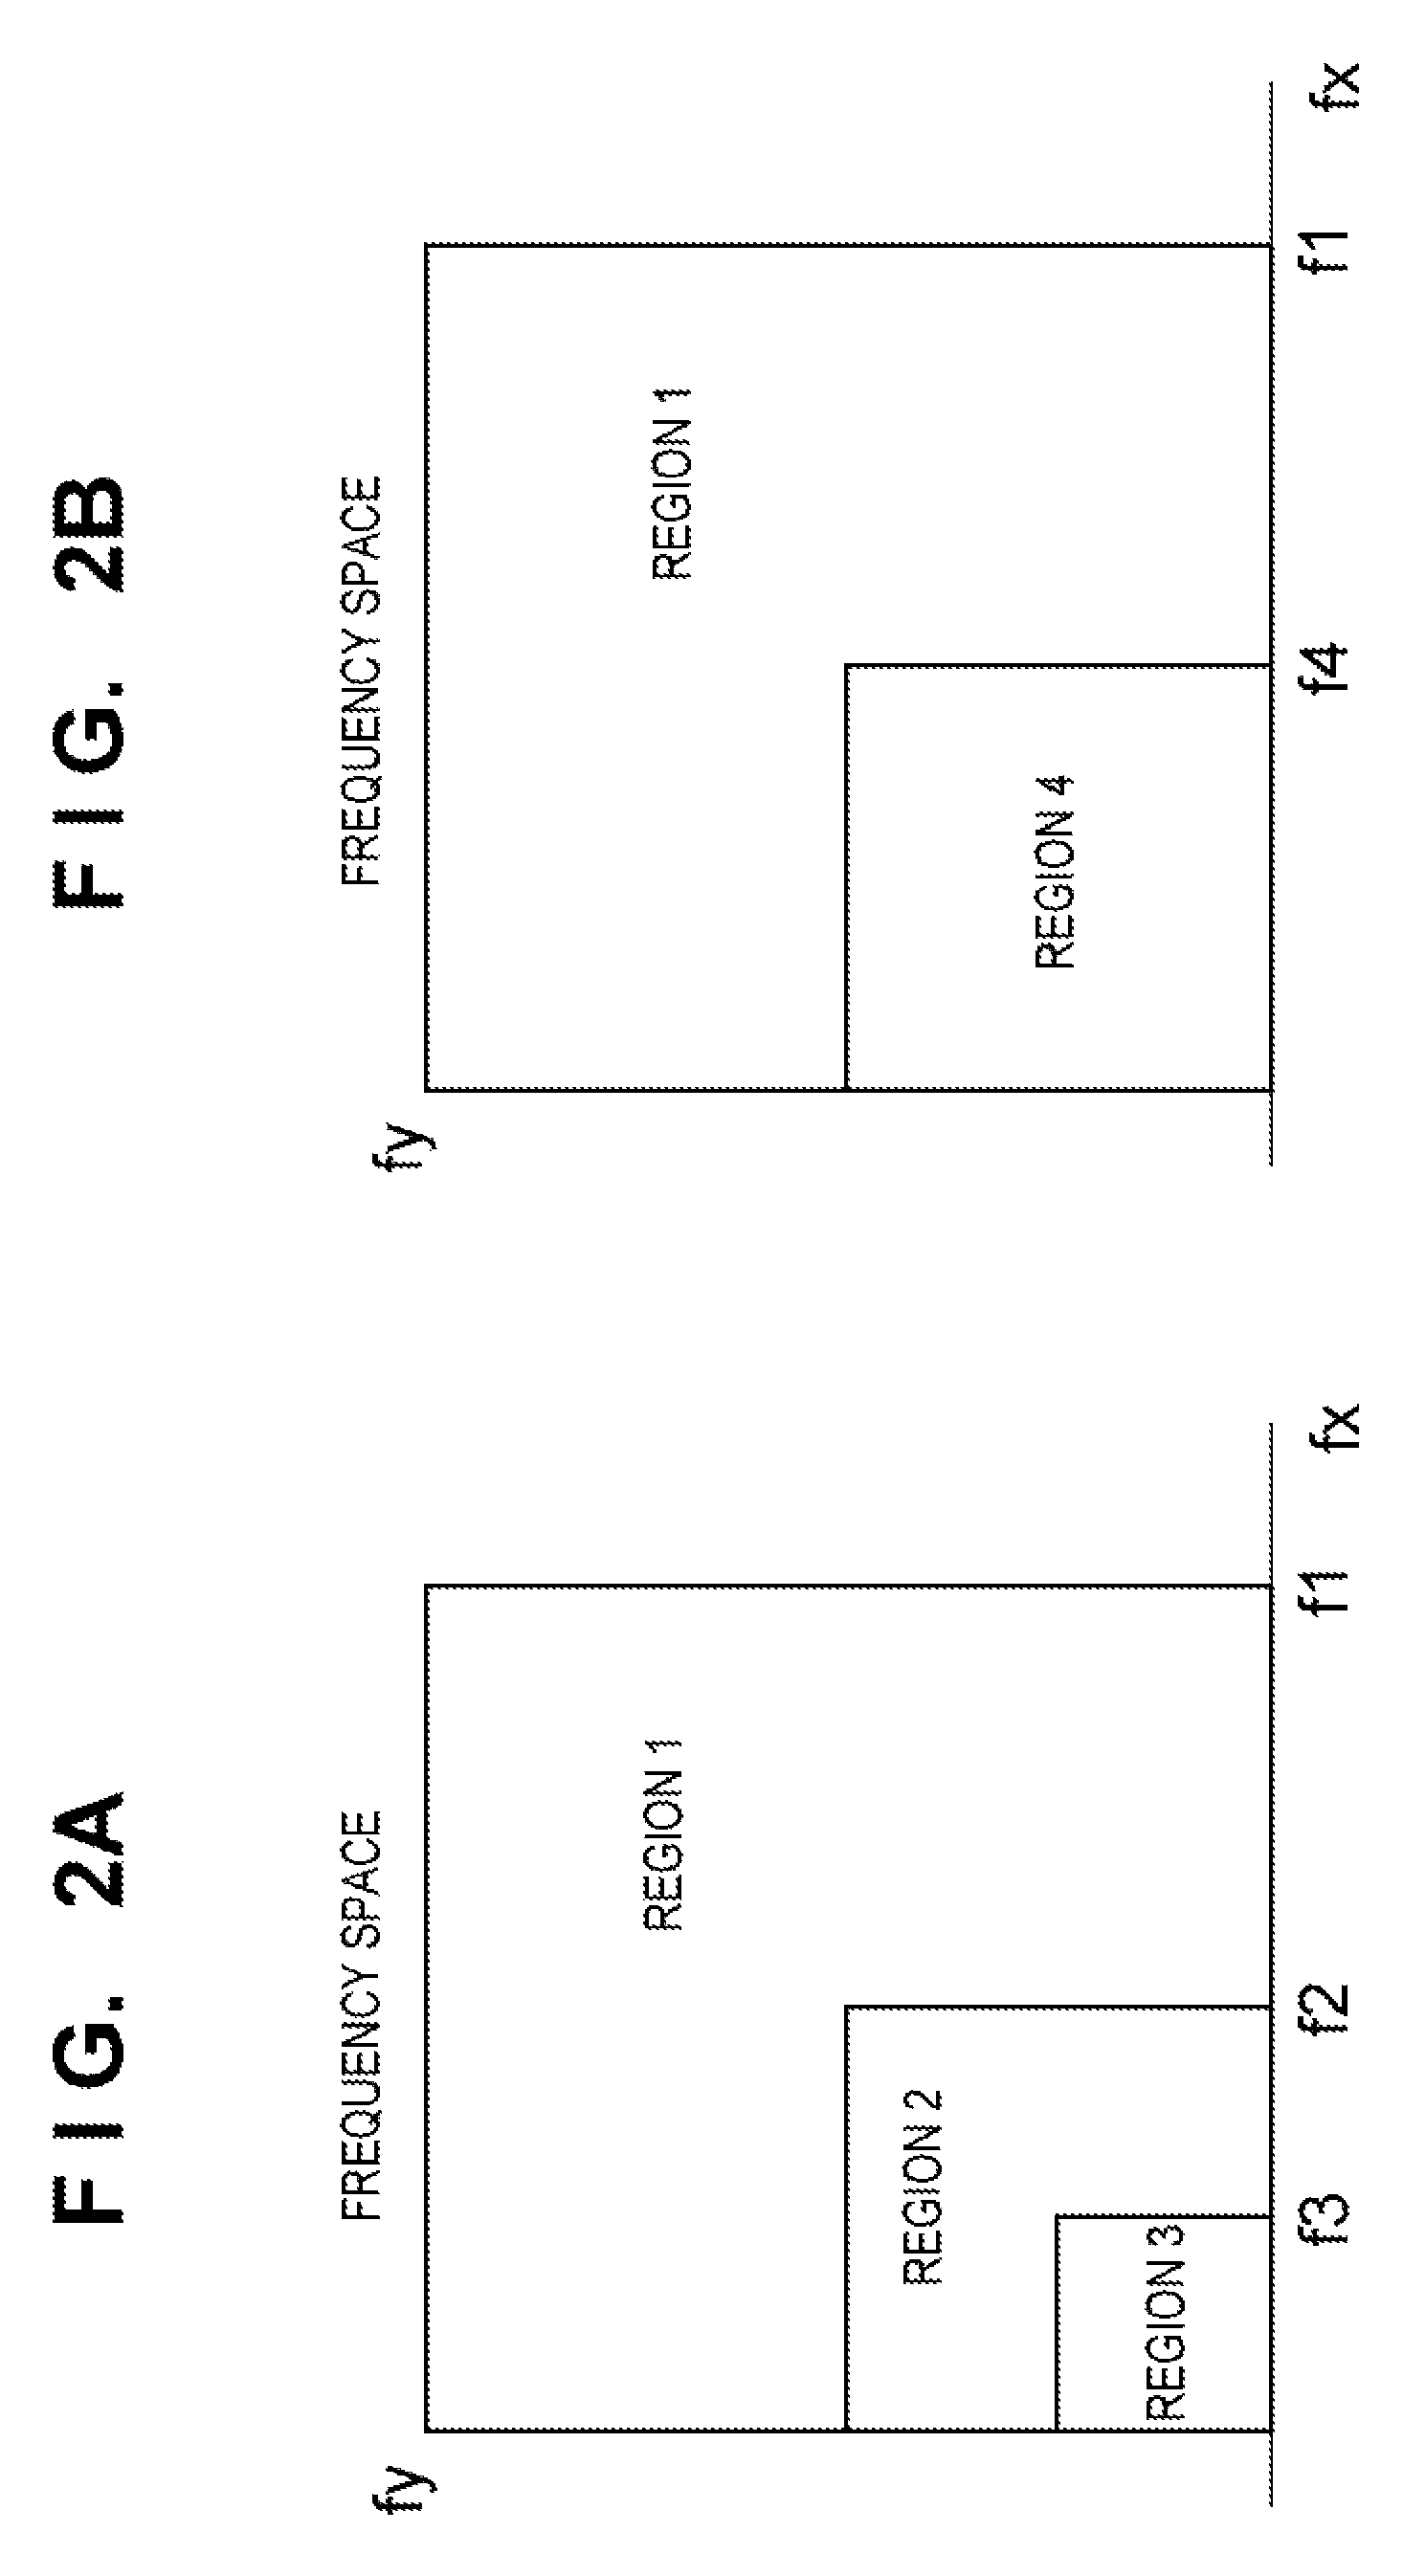 Selective combining of image data